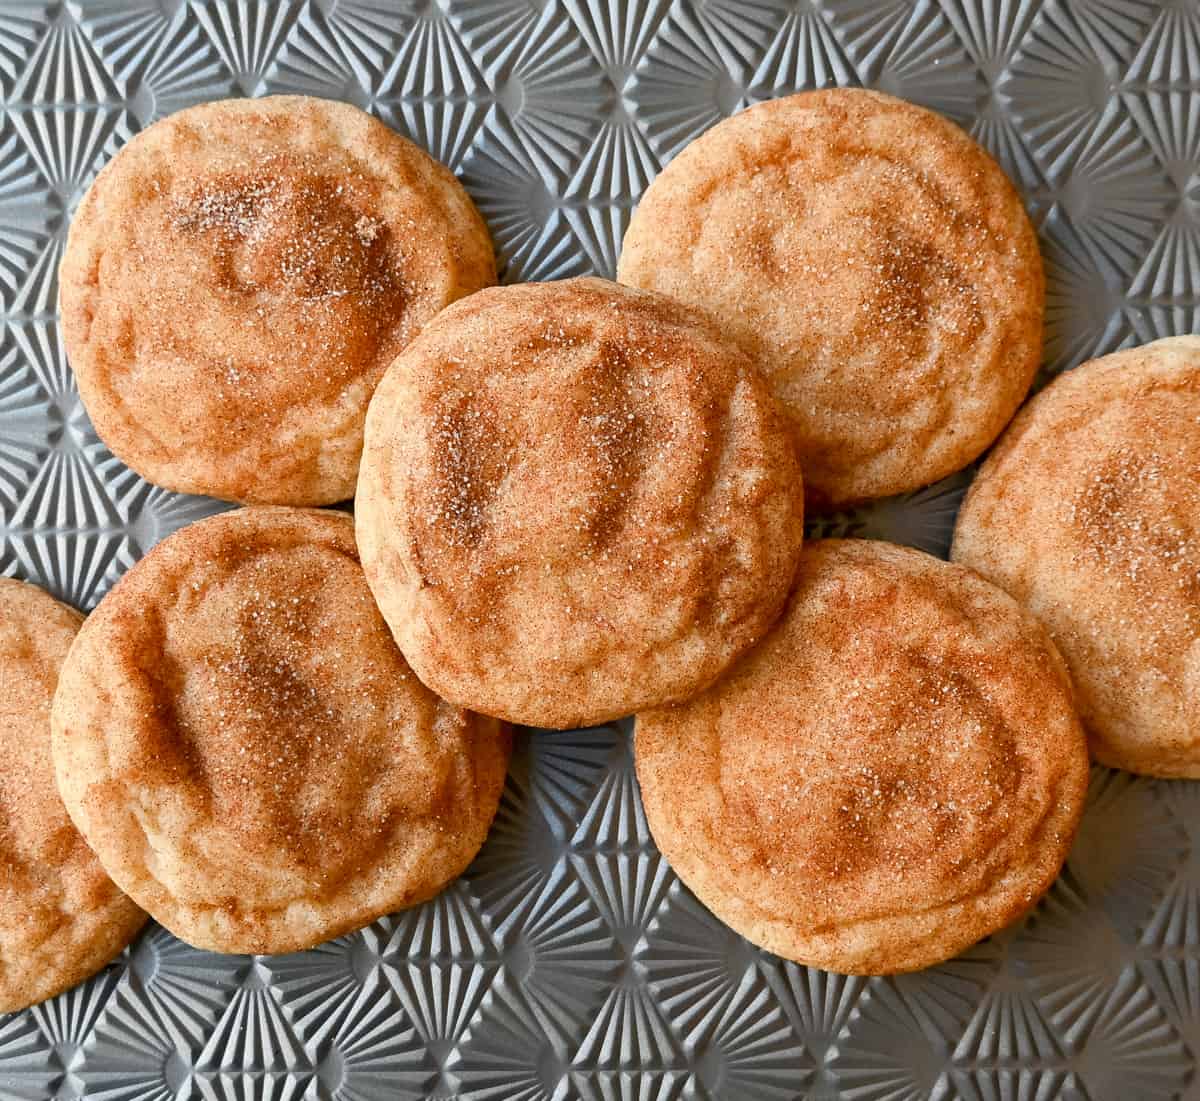 The Best Snickerdoodle Cookie Recipe. The popular cinnamon-sugar soft and chewy sugar cookie recipe. Tips and tricks for making the best snickerdoodle cookie recipe that always receives rave reviews. A recipe that has been in the family for over 30 years!